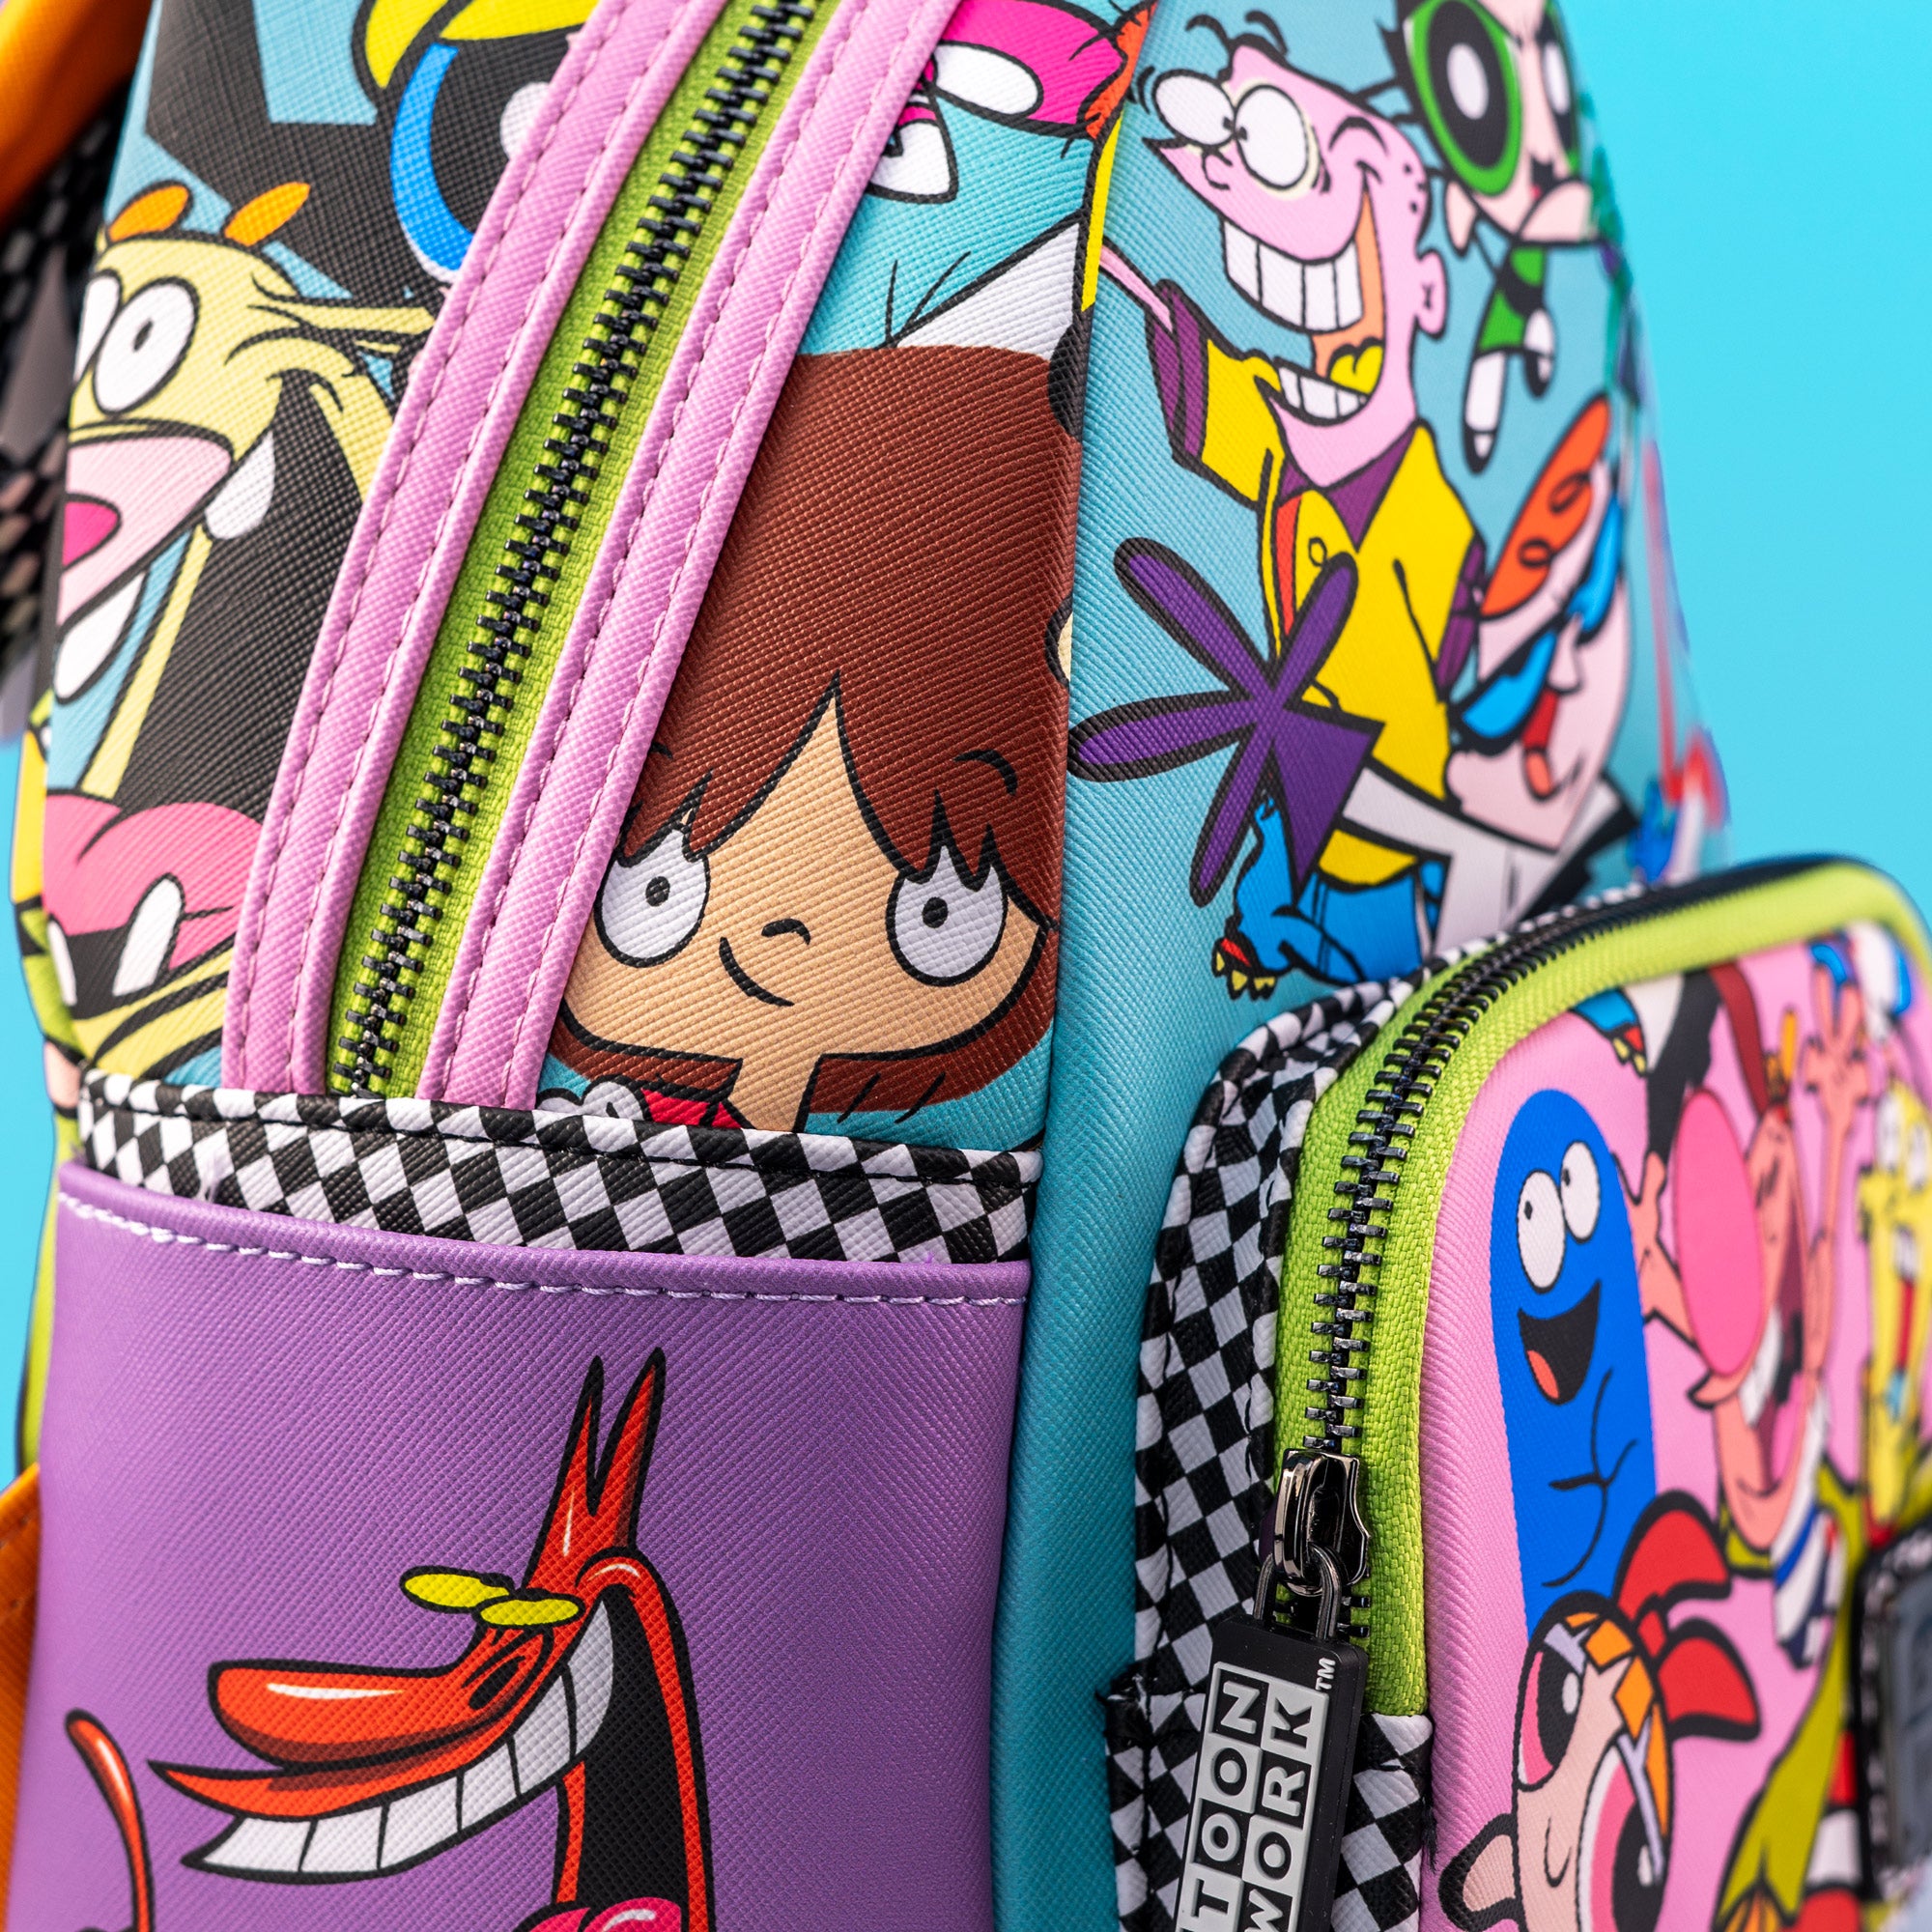 Loungefly x Cartoon Network Retro Collage Mini Backpack